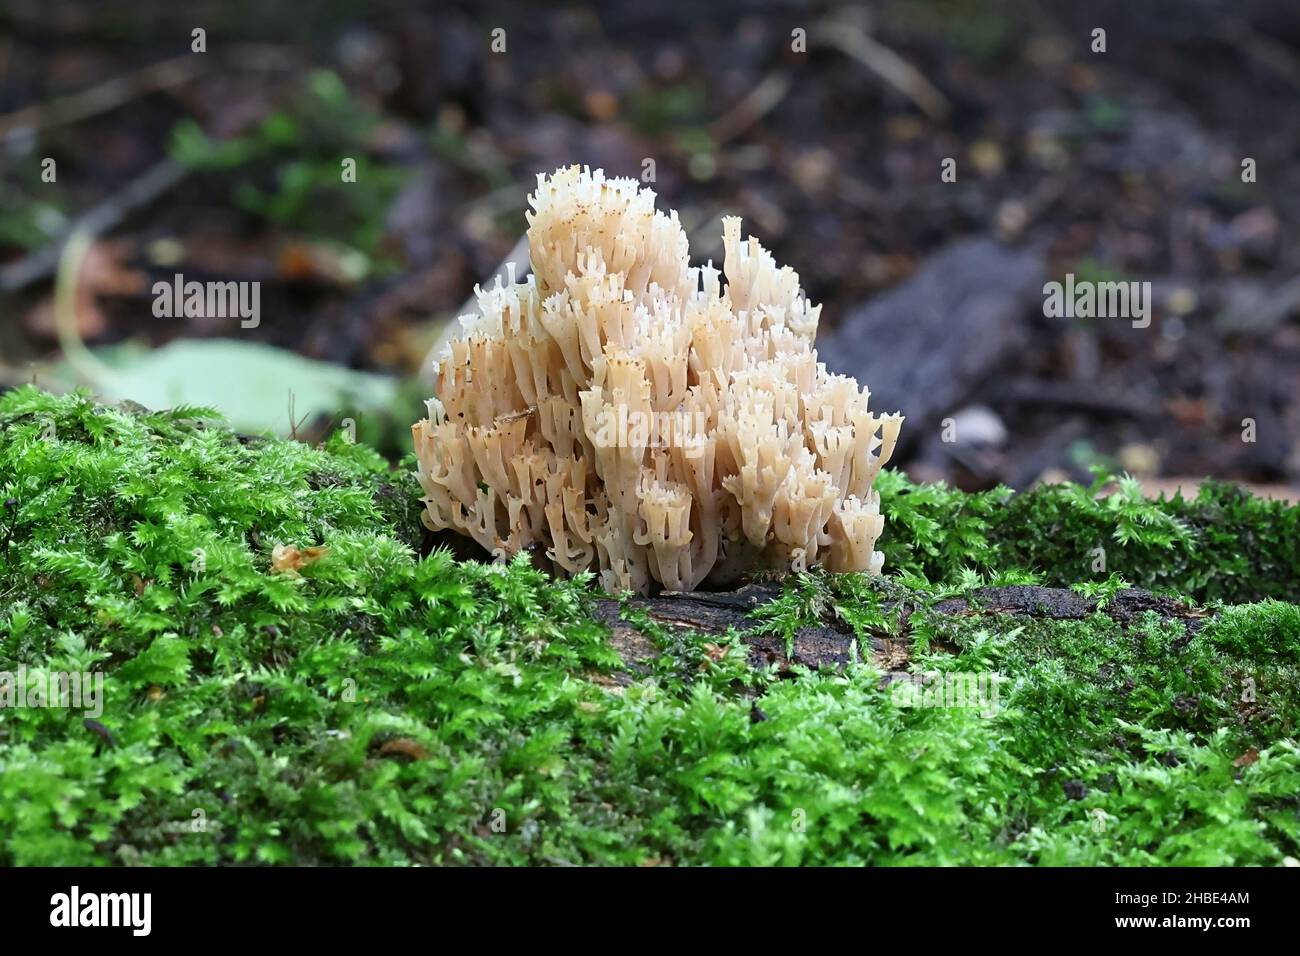 Artomyces pyxidatus, known as crown coral, crown-tipped coral fungus or candelabra coral, wild mushroom from Finland Stock Photo